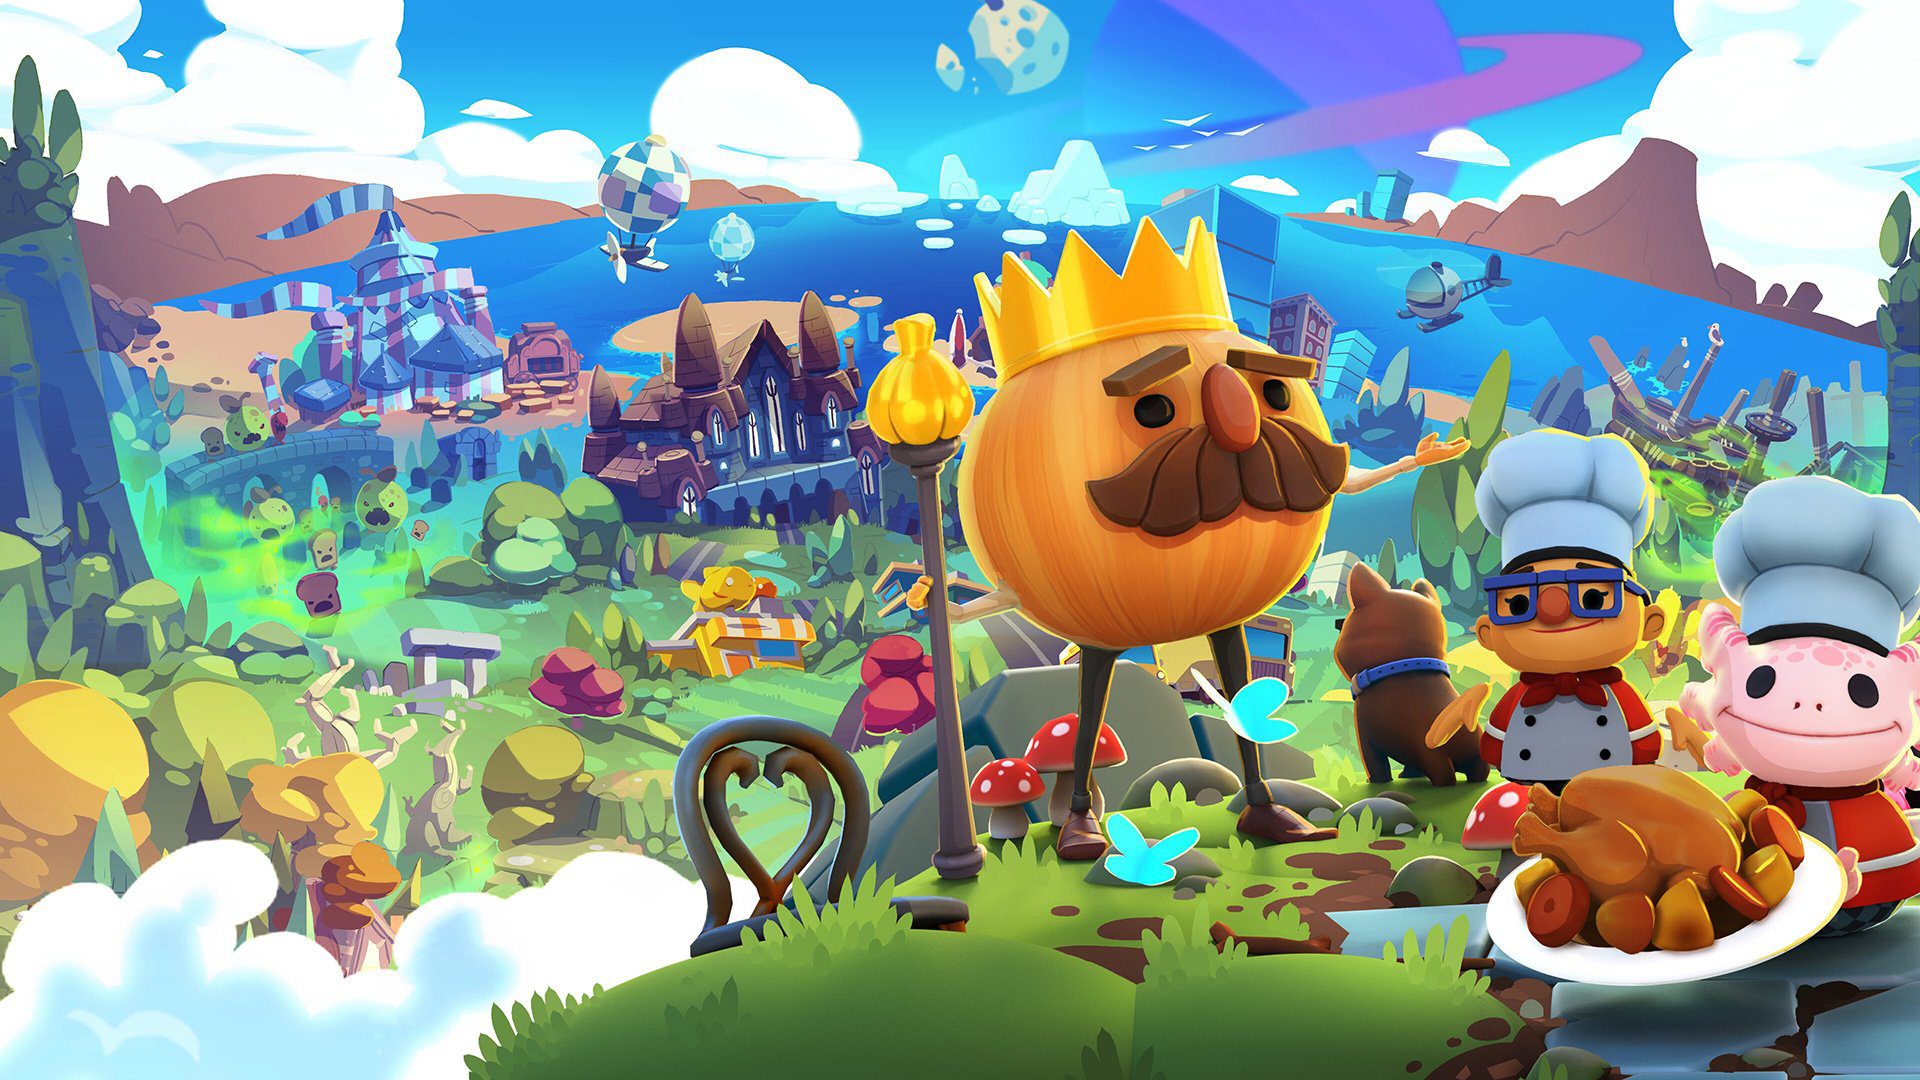 Overcooked: All You Can Eat key art